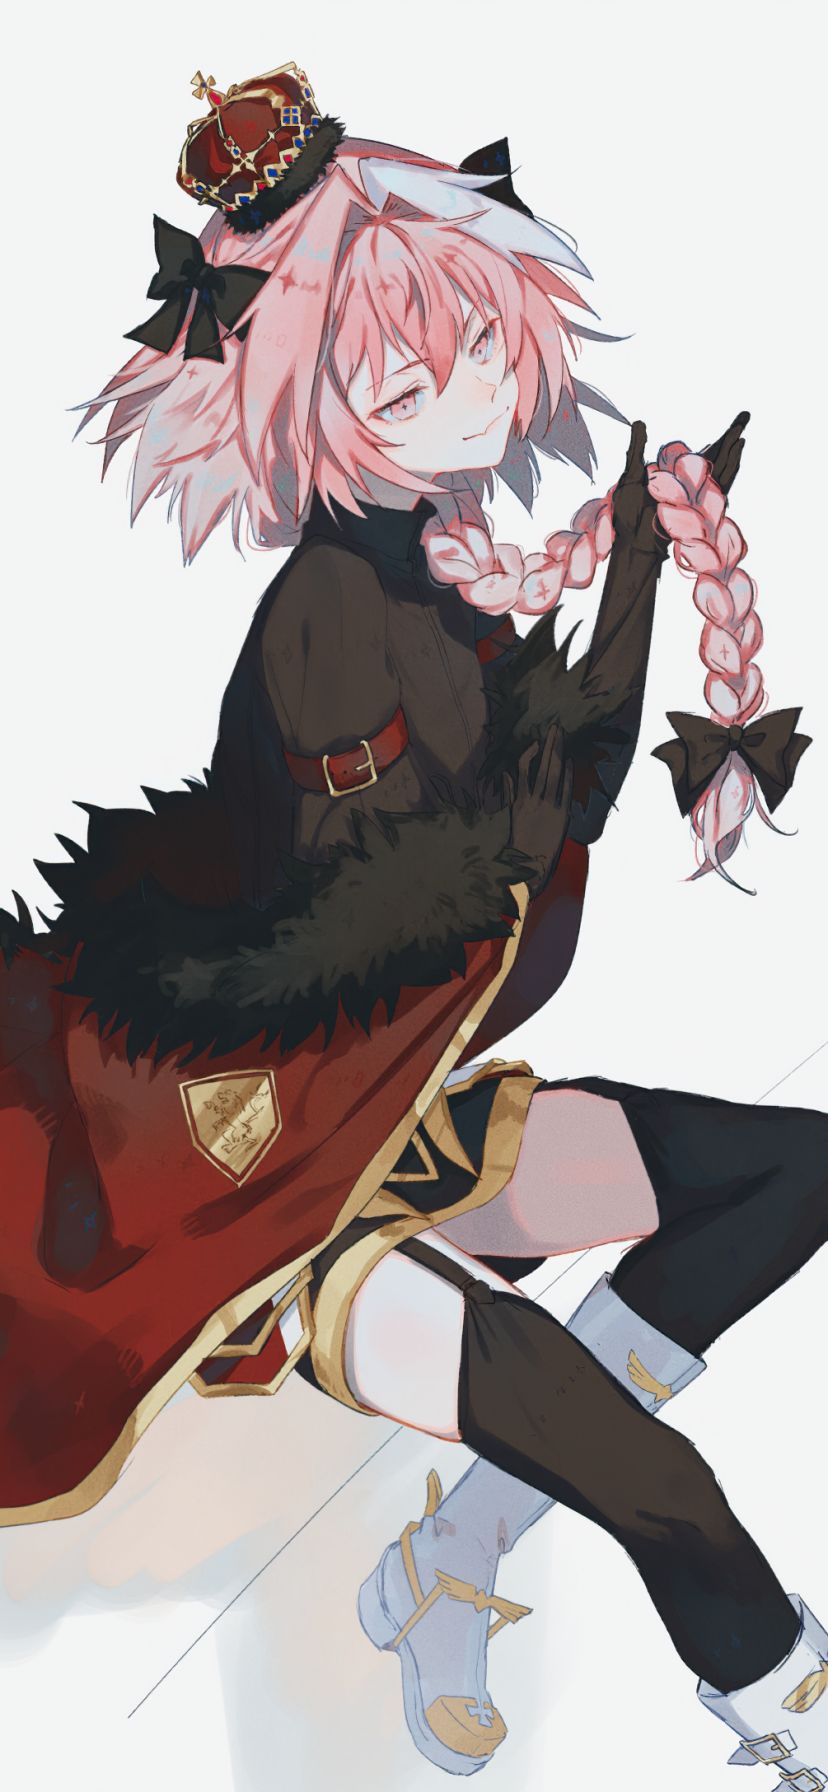 405998 anime anime girl FateGrand Order Astolfo FateGrand Order  anime boys knight braided hair ribbons wallpaper 1080p 2303x3000  Rare  Gallery HD Wallpapers